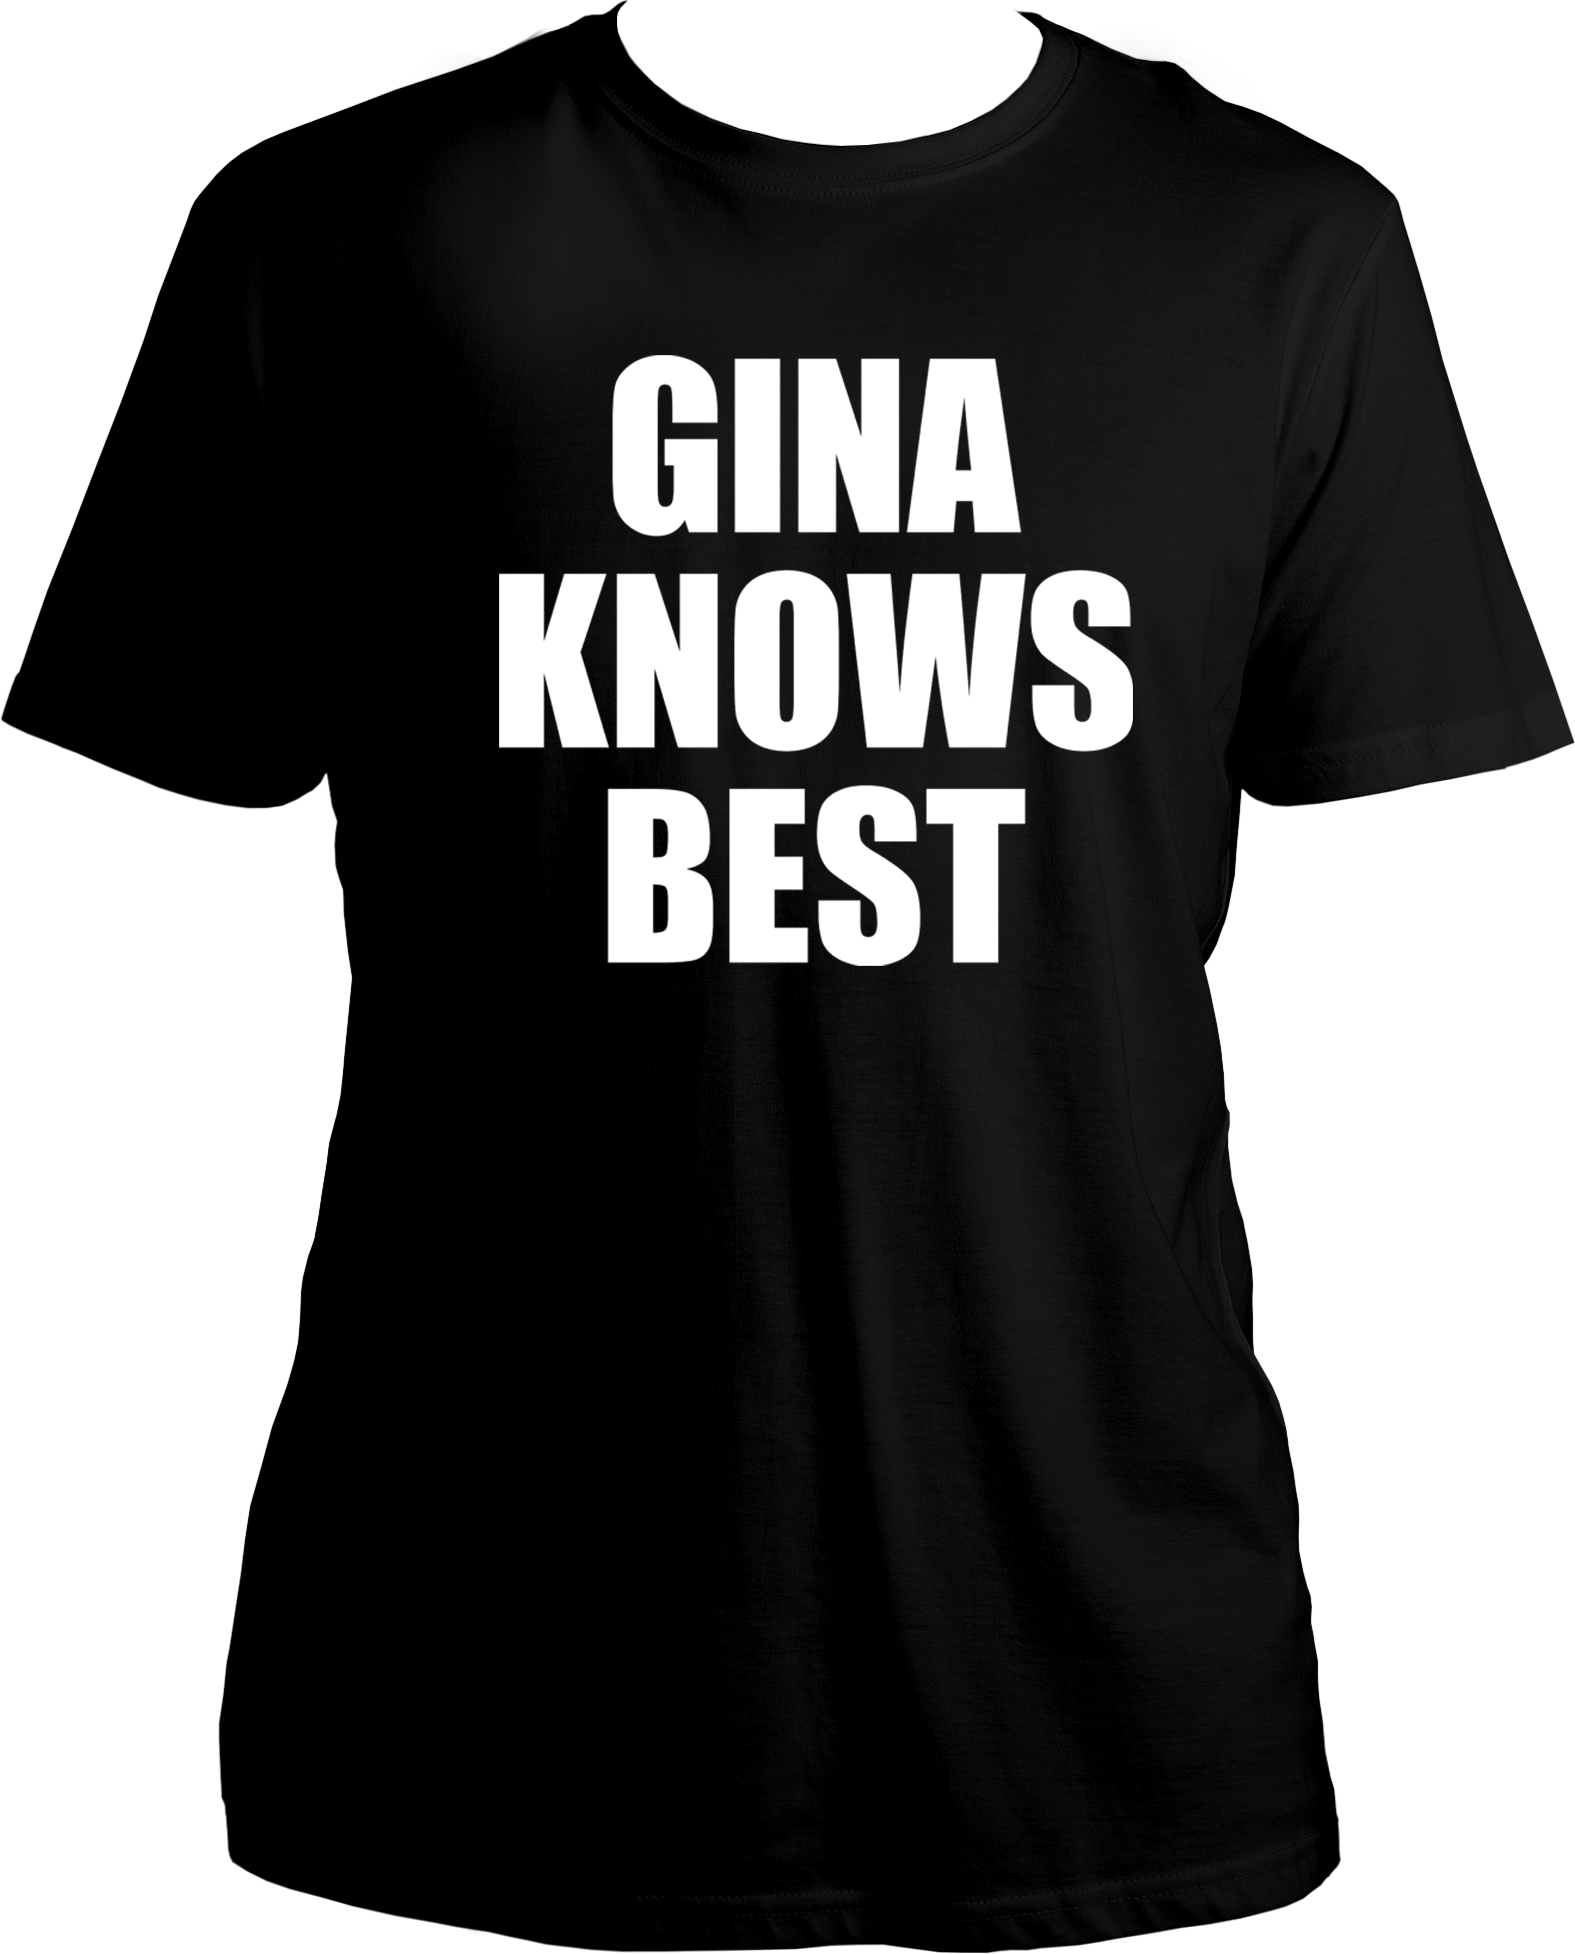 Welcome to our T-shirt universe, where fandom meets fashion! Introducing our Unisex Cotton T-shirt from the TV Shows category, specifically under the Brooklyn Nine-Nine subcategory. Get ready to flaunt your love for the show with our hilarious "Gina Knows Everything" print!